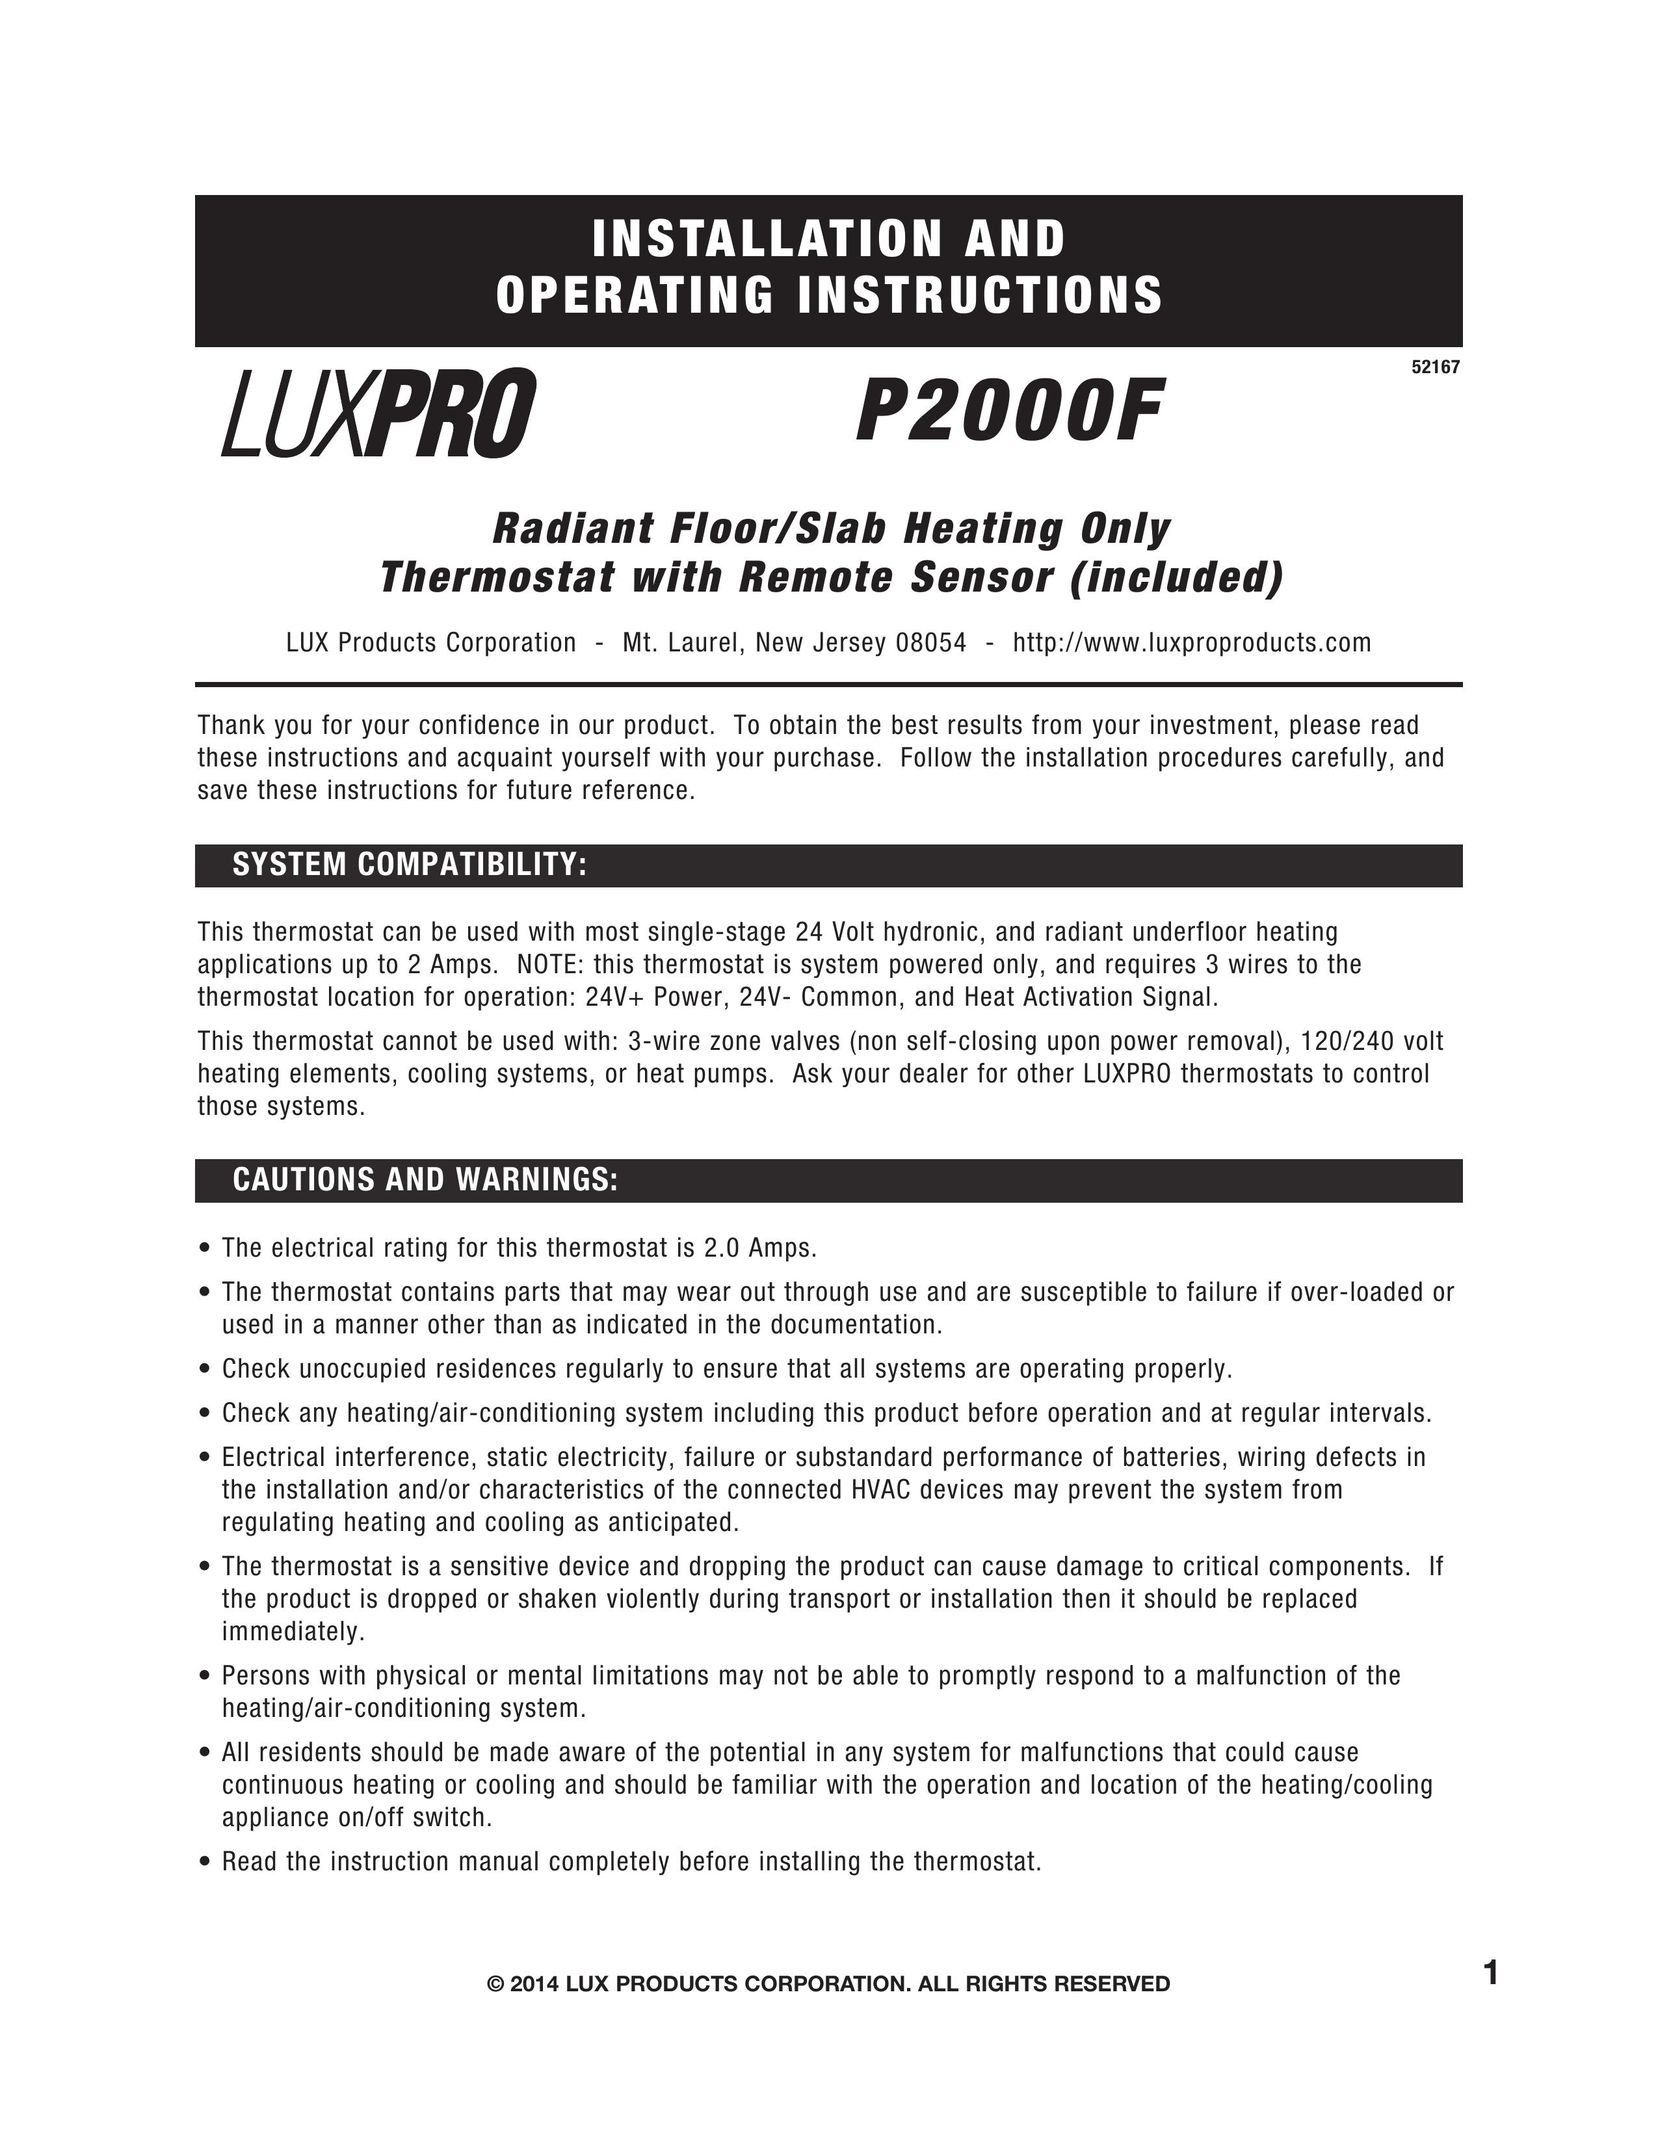 Lux Products P2000F Thermostat User Manual